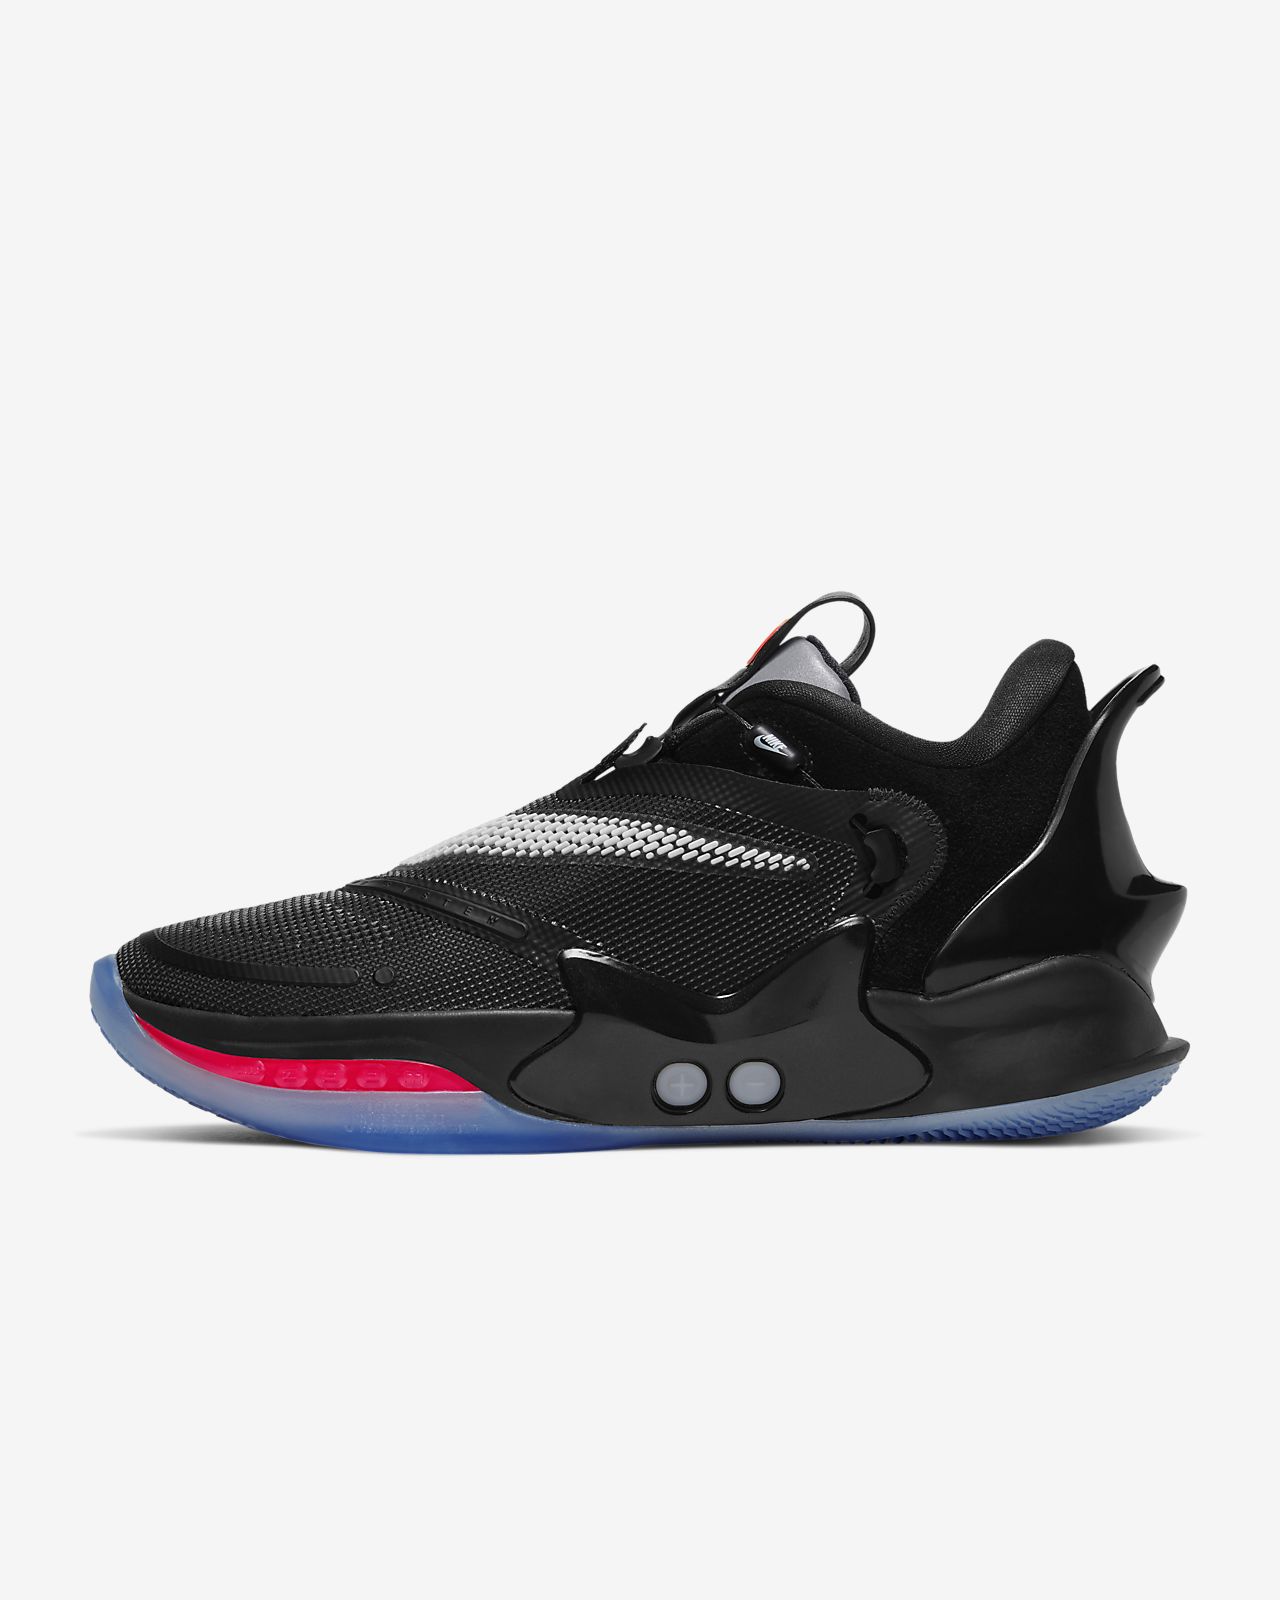 nike adapt bb self lacing shoes Online 